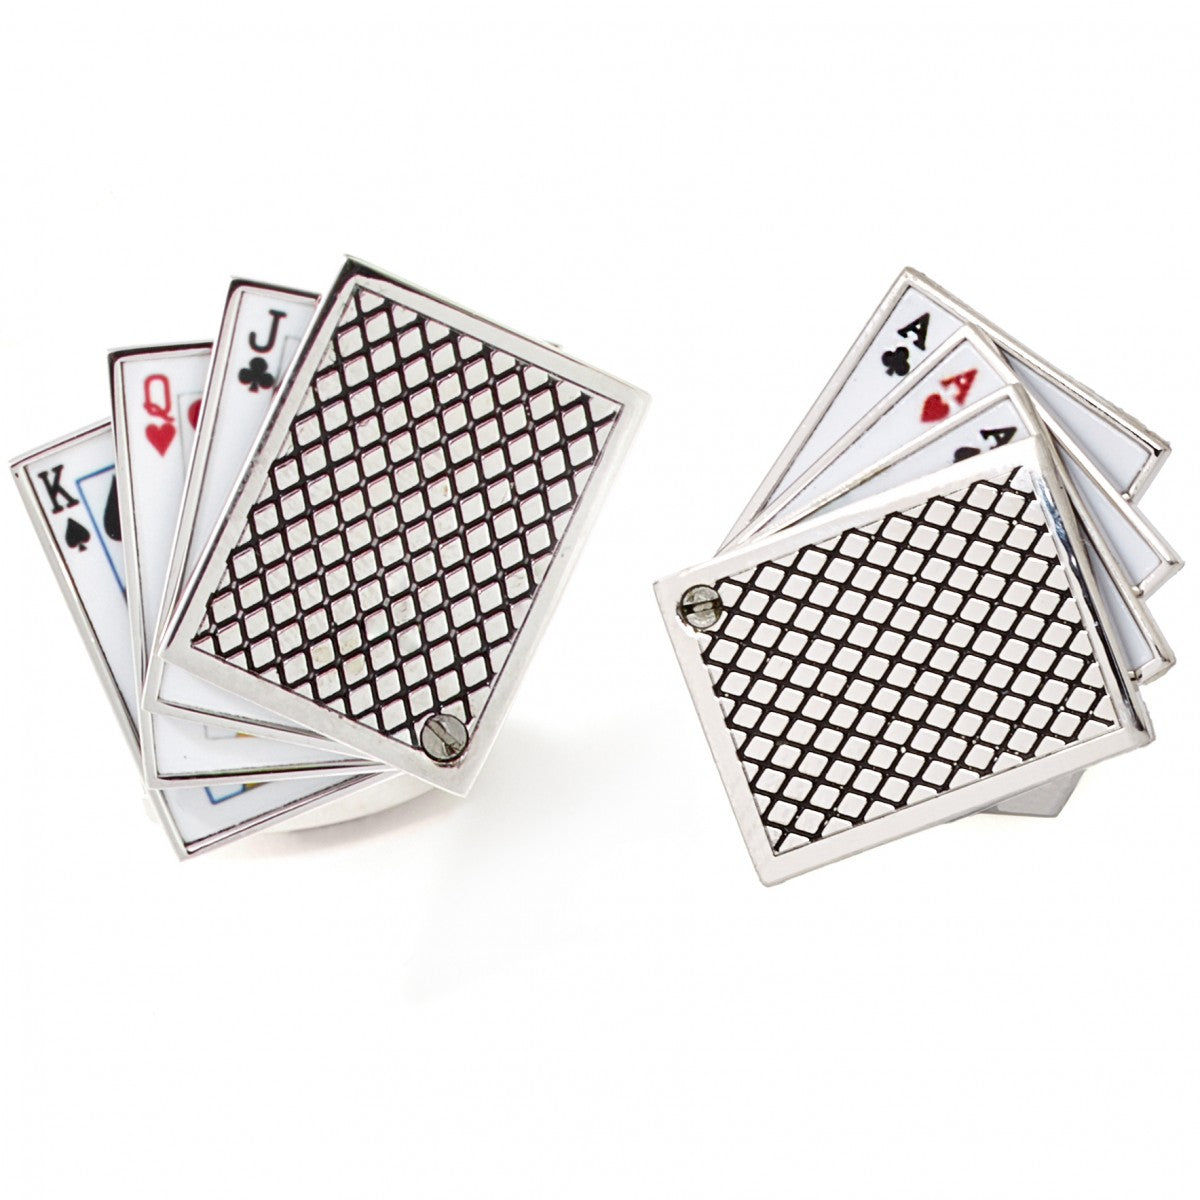 Tateossian Playing Cards Cufflinks, King, Queen, Jack and Aces